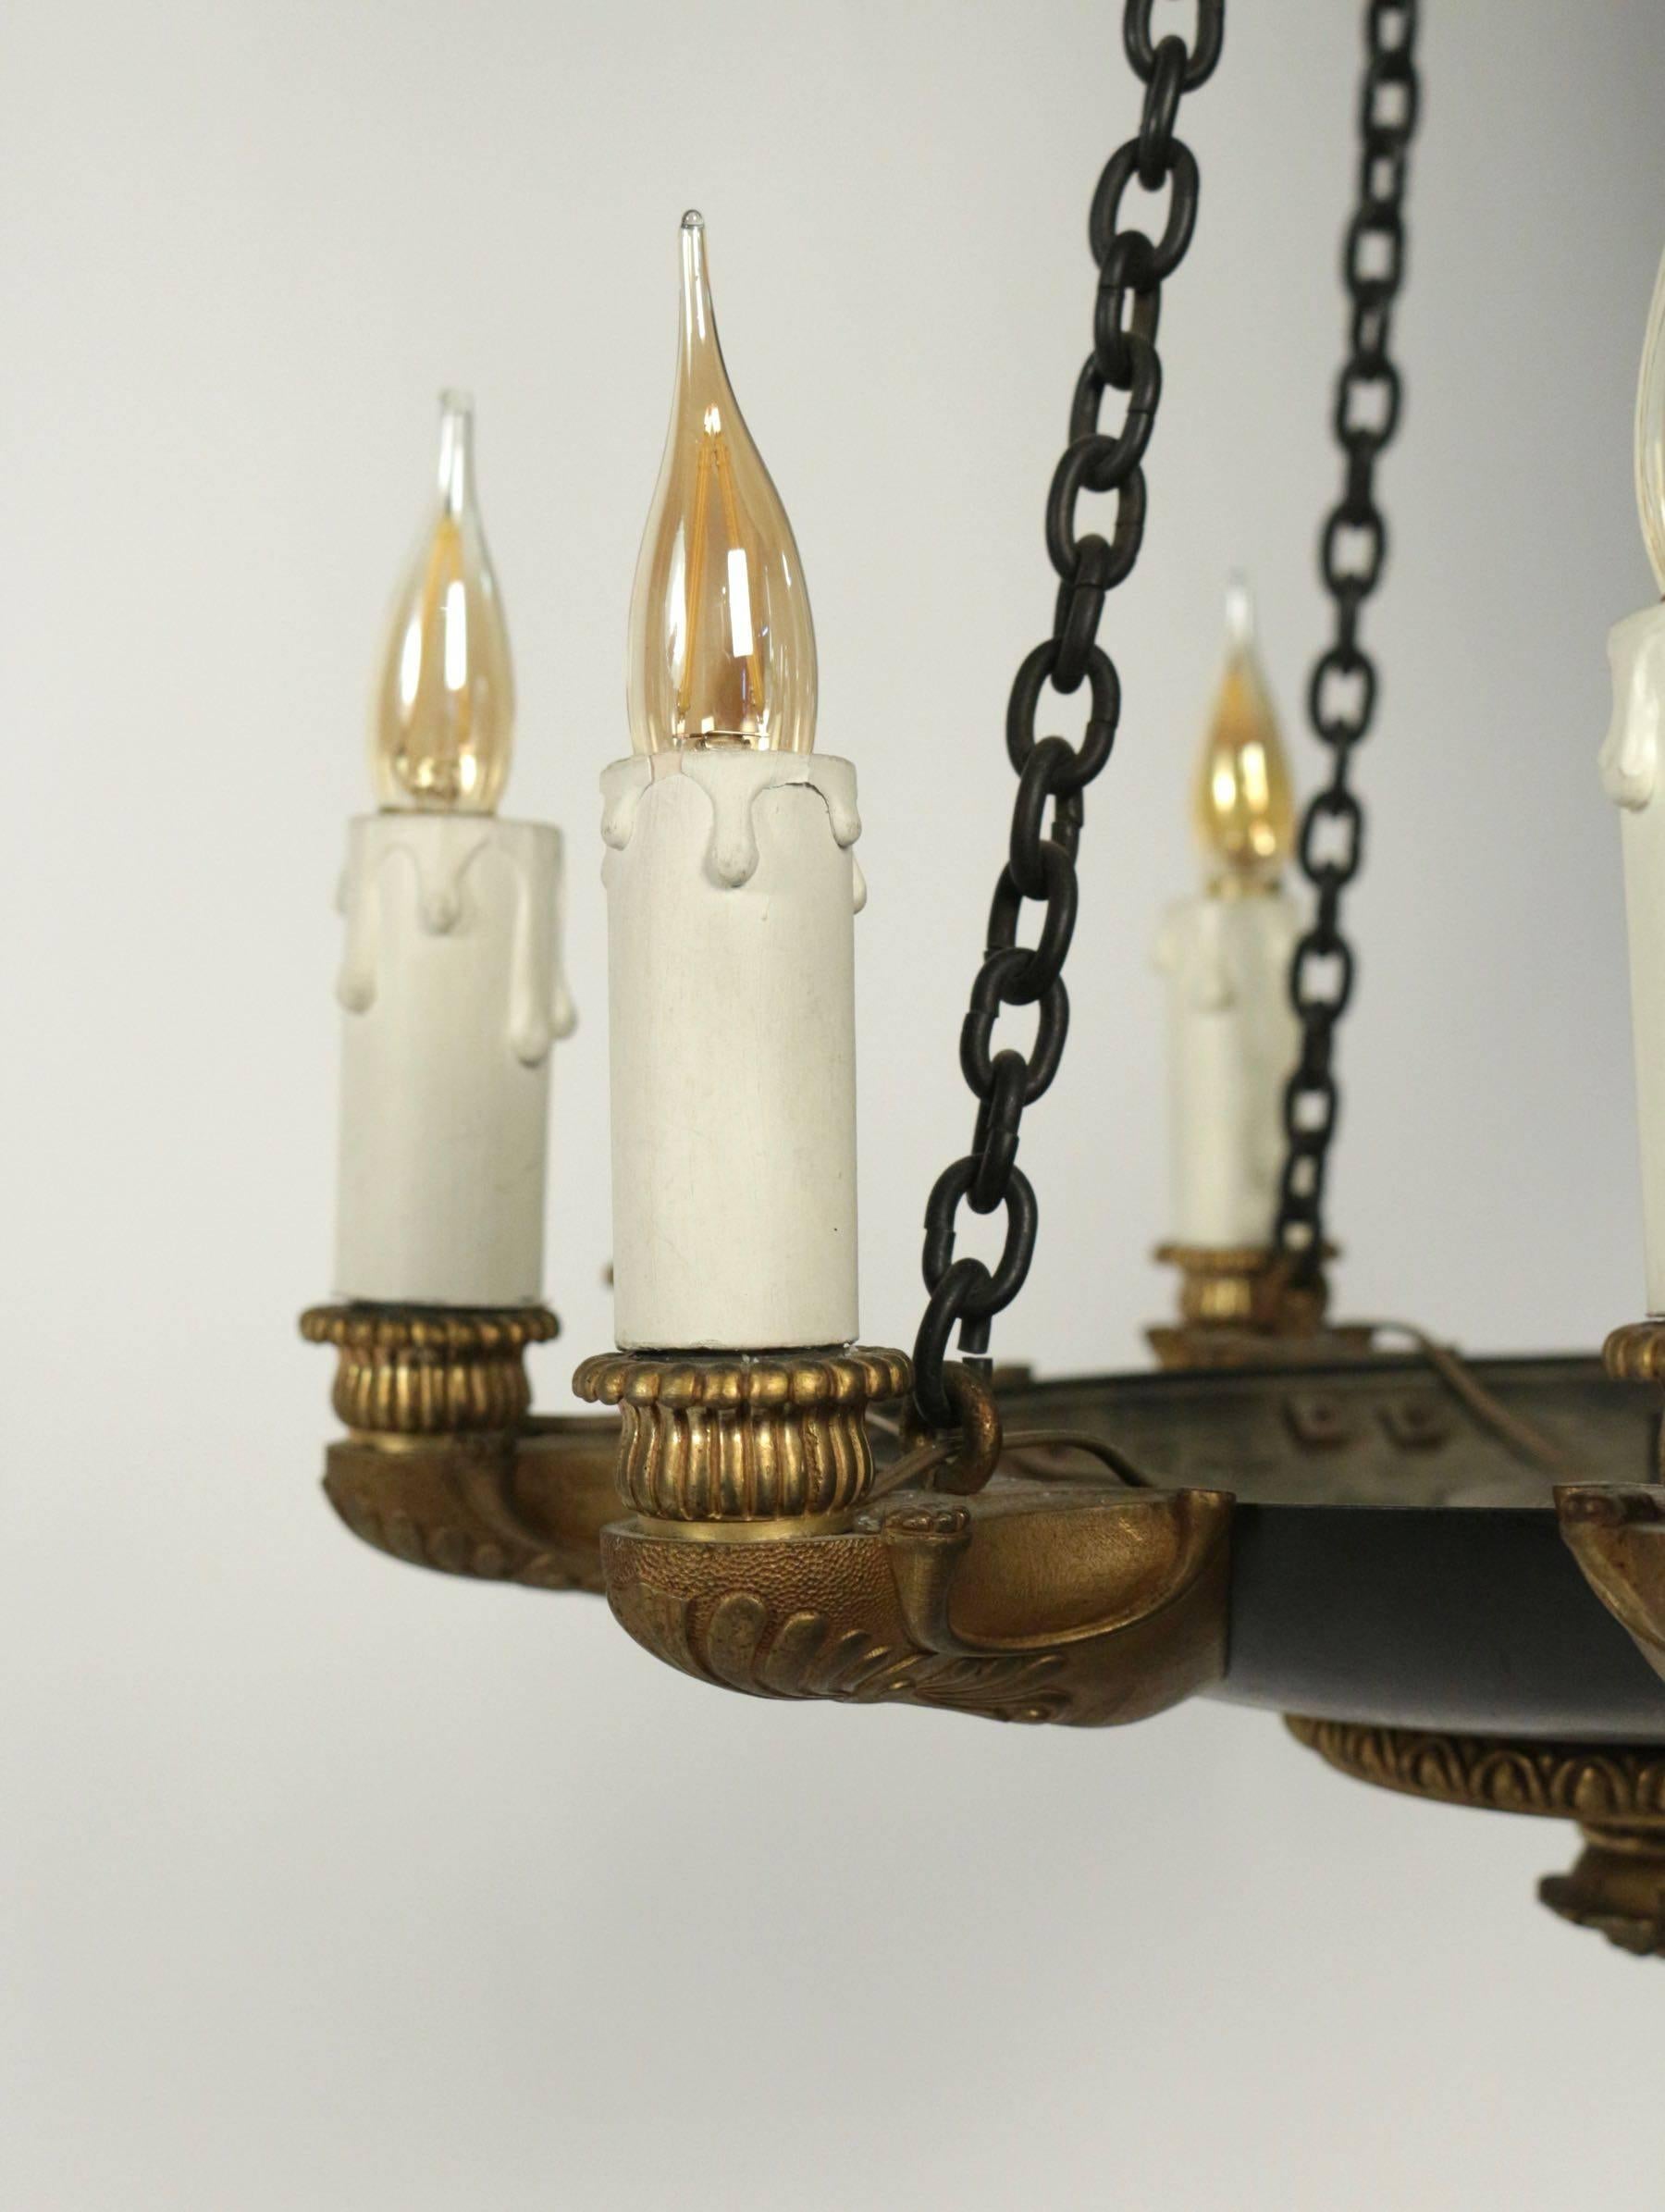 Bronze Small Unusual Empire Chandelier with Many Arms '9 Lights'